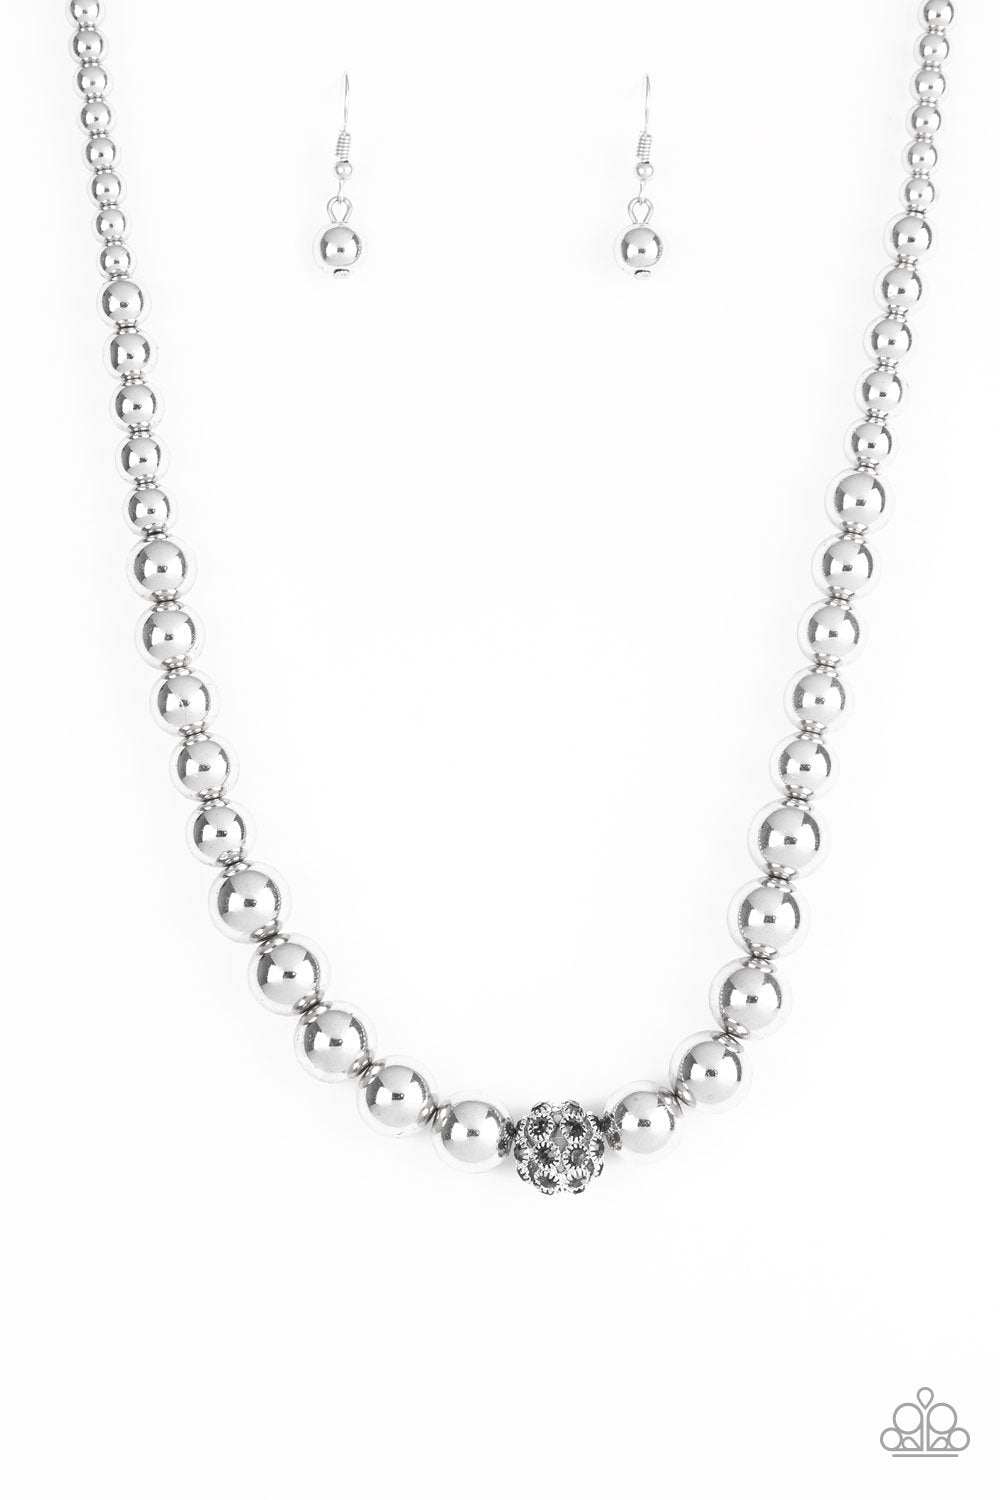 "High-Stakes FAME" - Silver #856 - Paparazzi Accessories